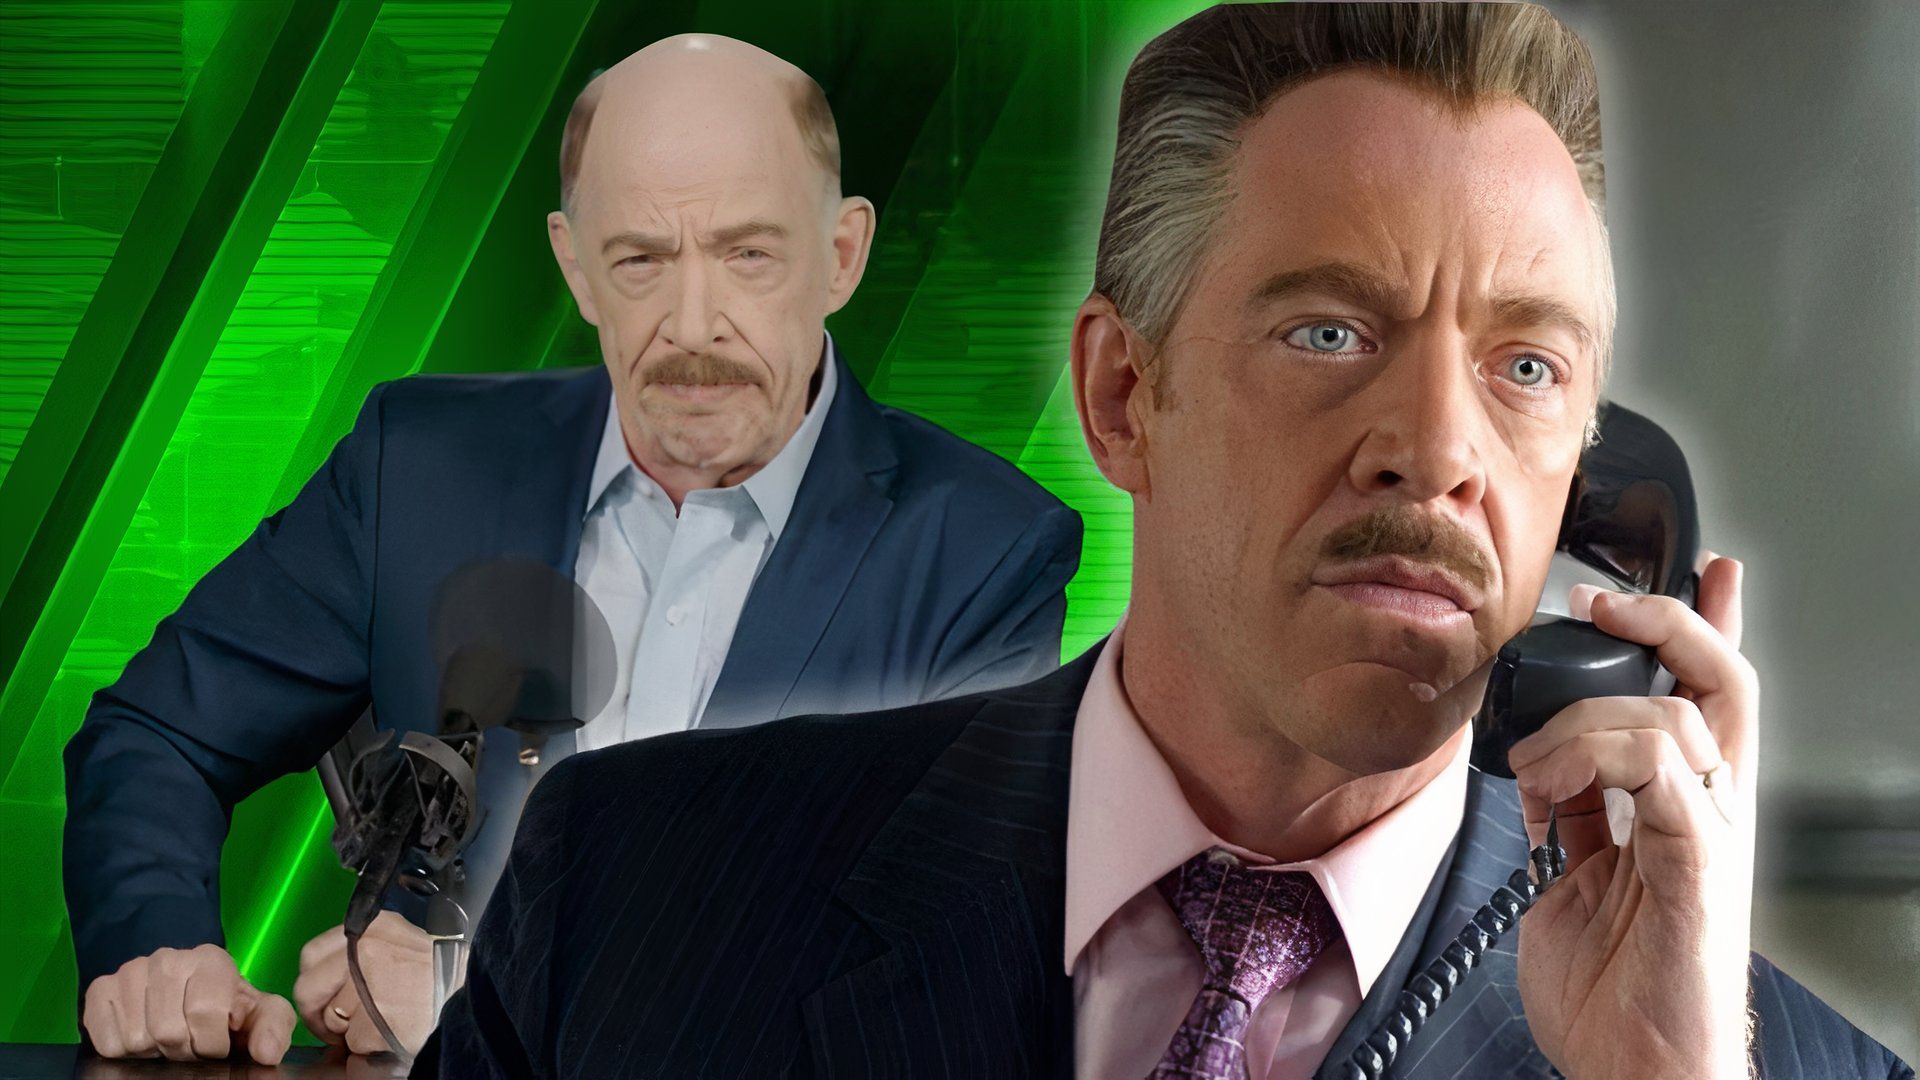 J.K. Simmons on the phone as J. Jonah Jameson and on TV as him in Spider-Man